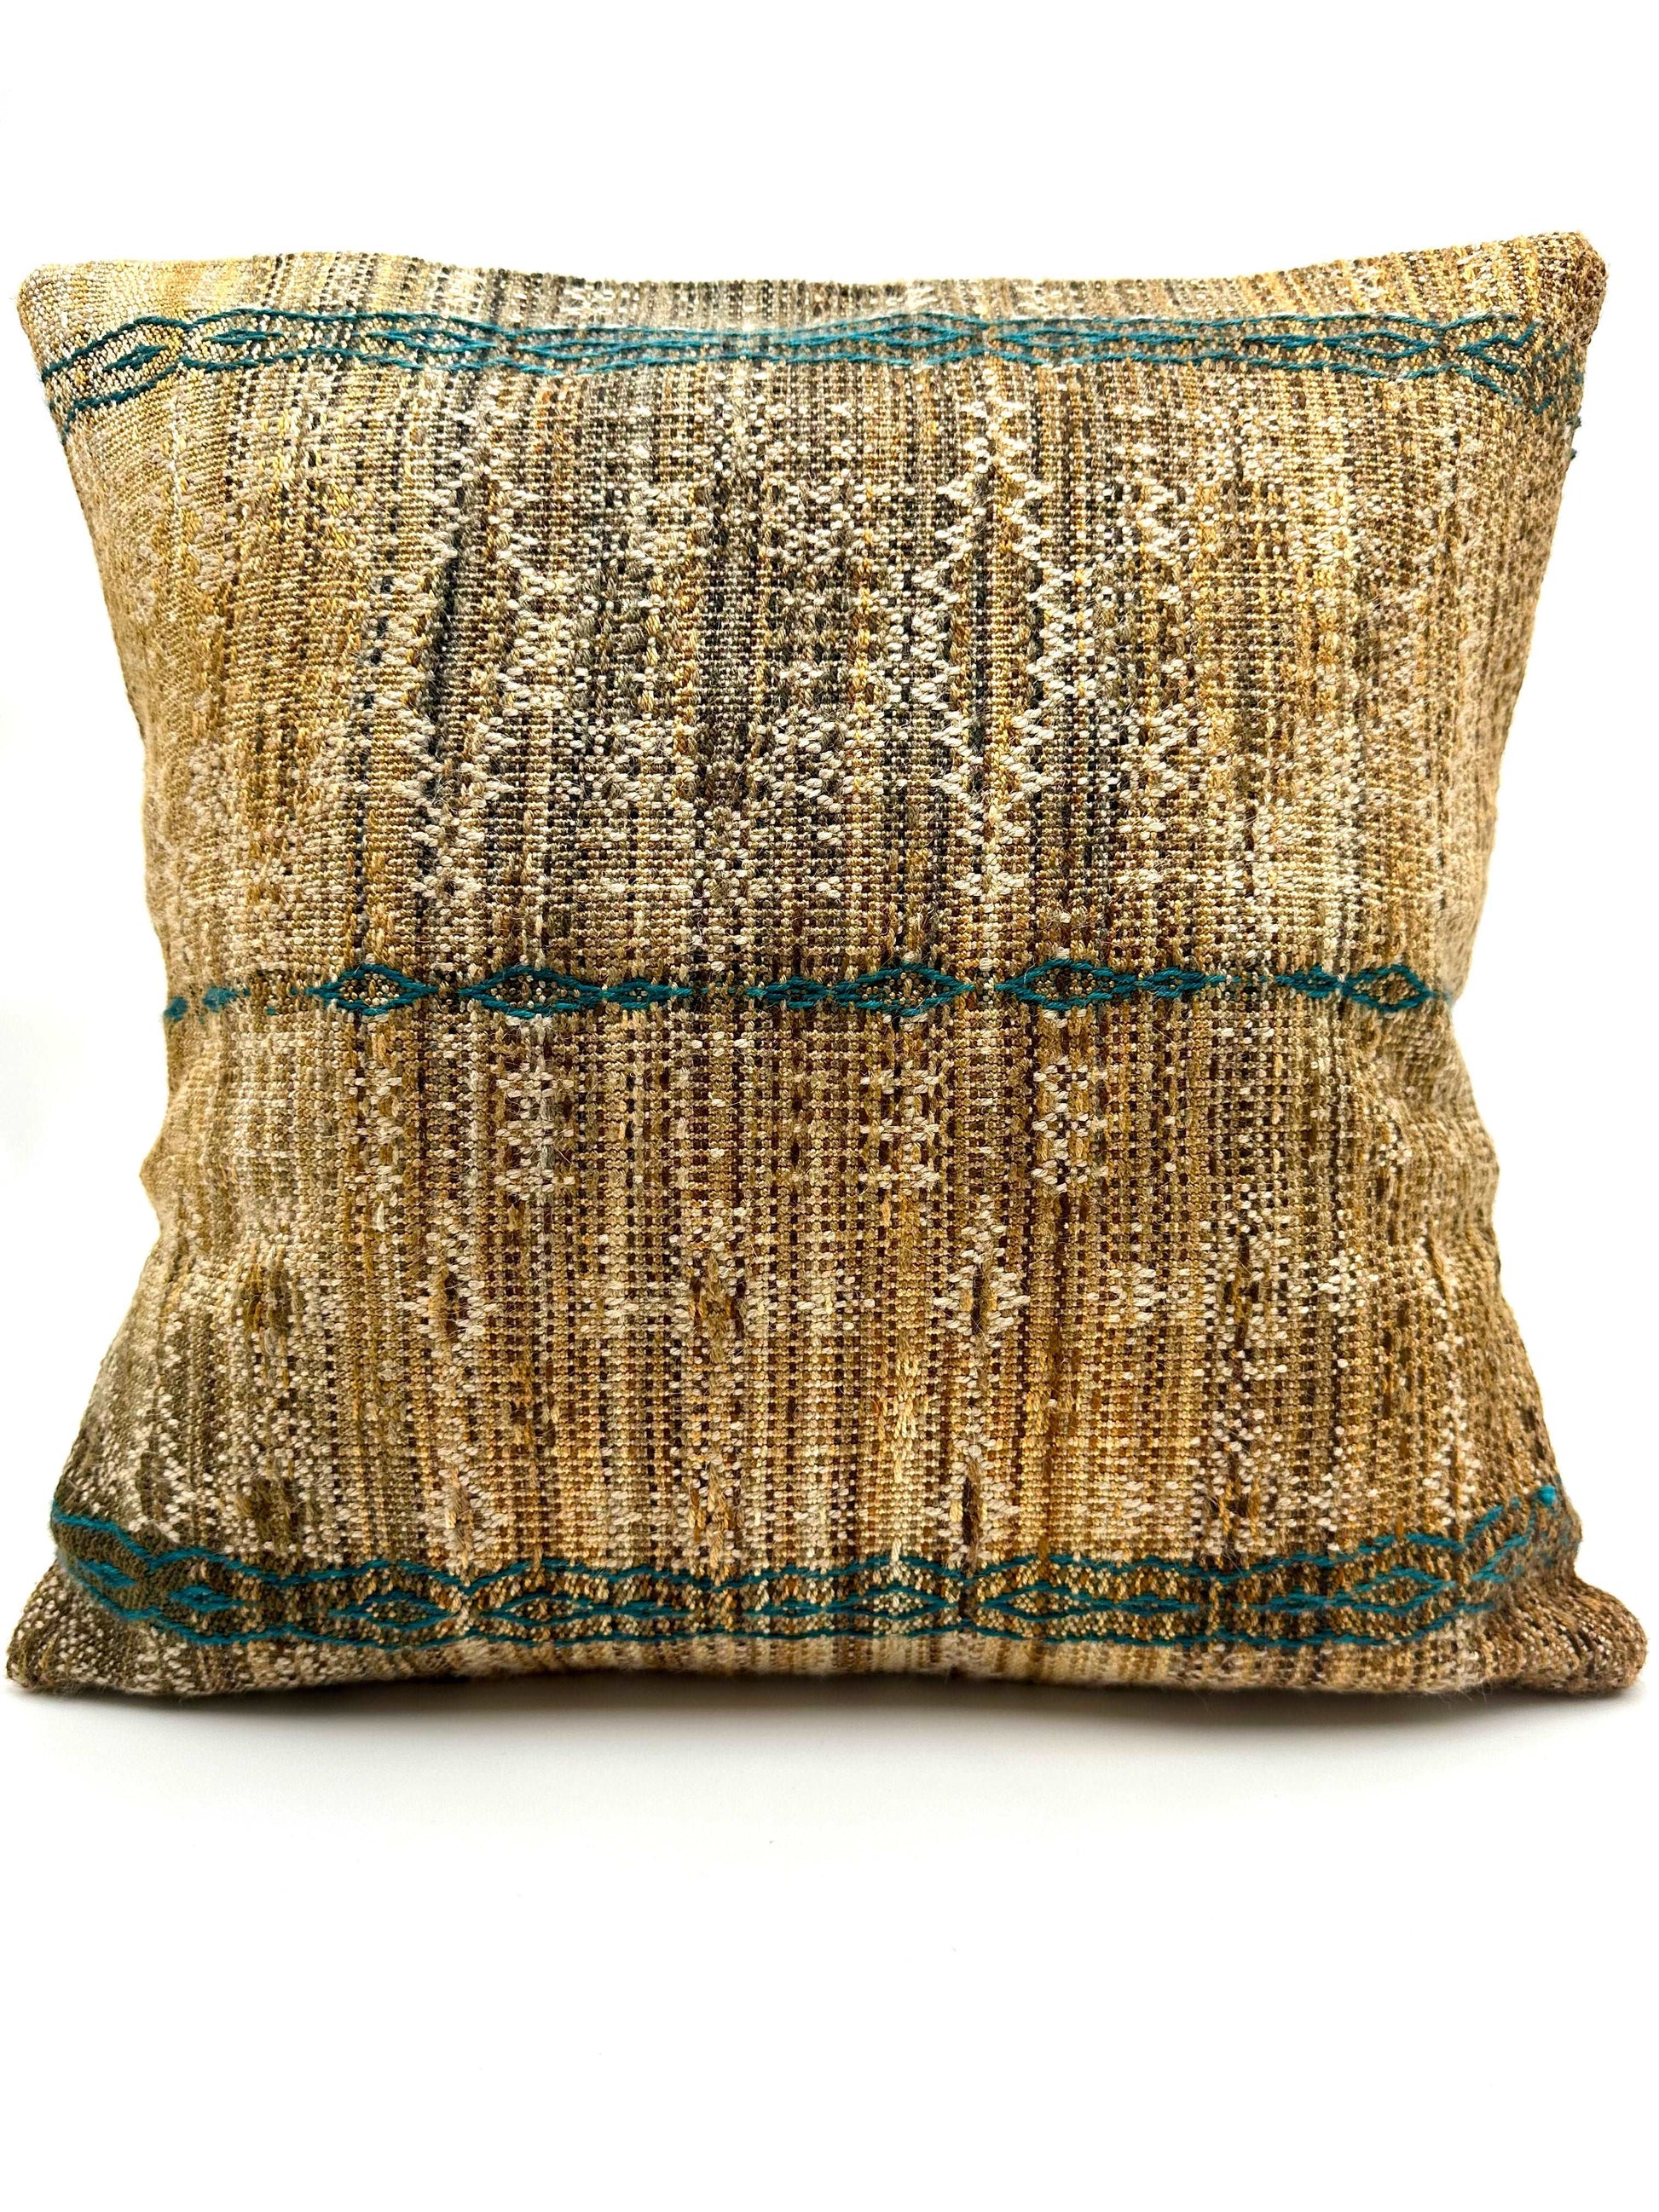 Neutral Warm Toned Handwoven throw pillow with turquoise detailing